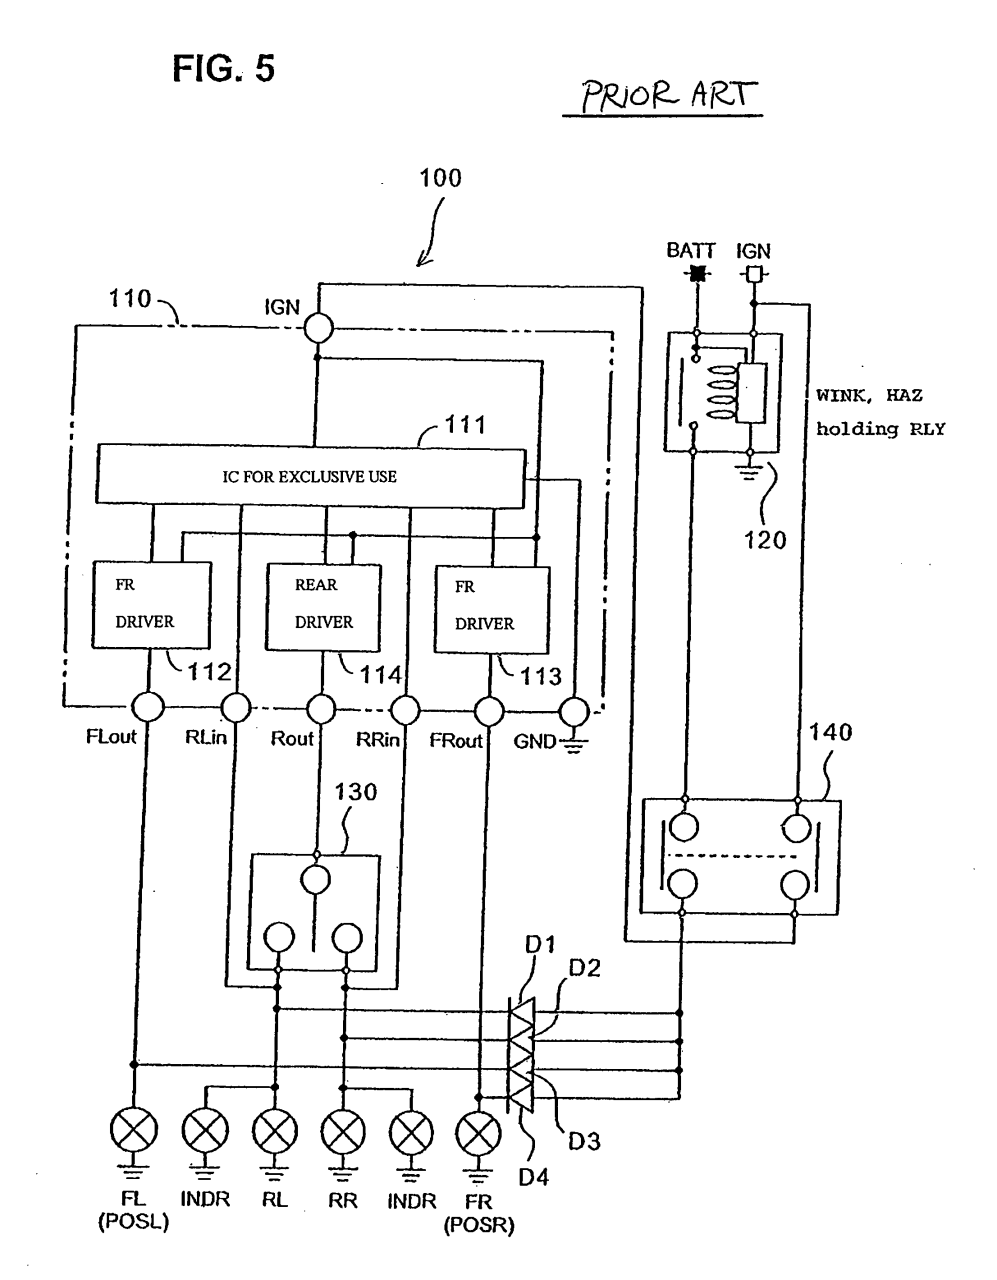 3 Position Ignition Switch Wiring Diagram